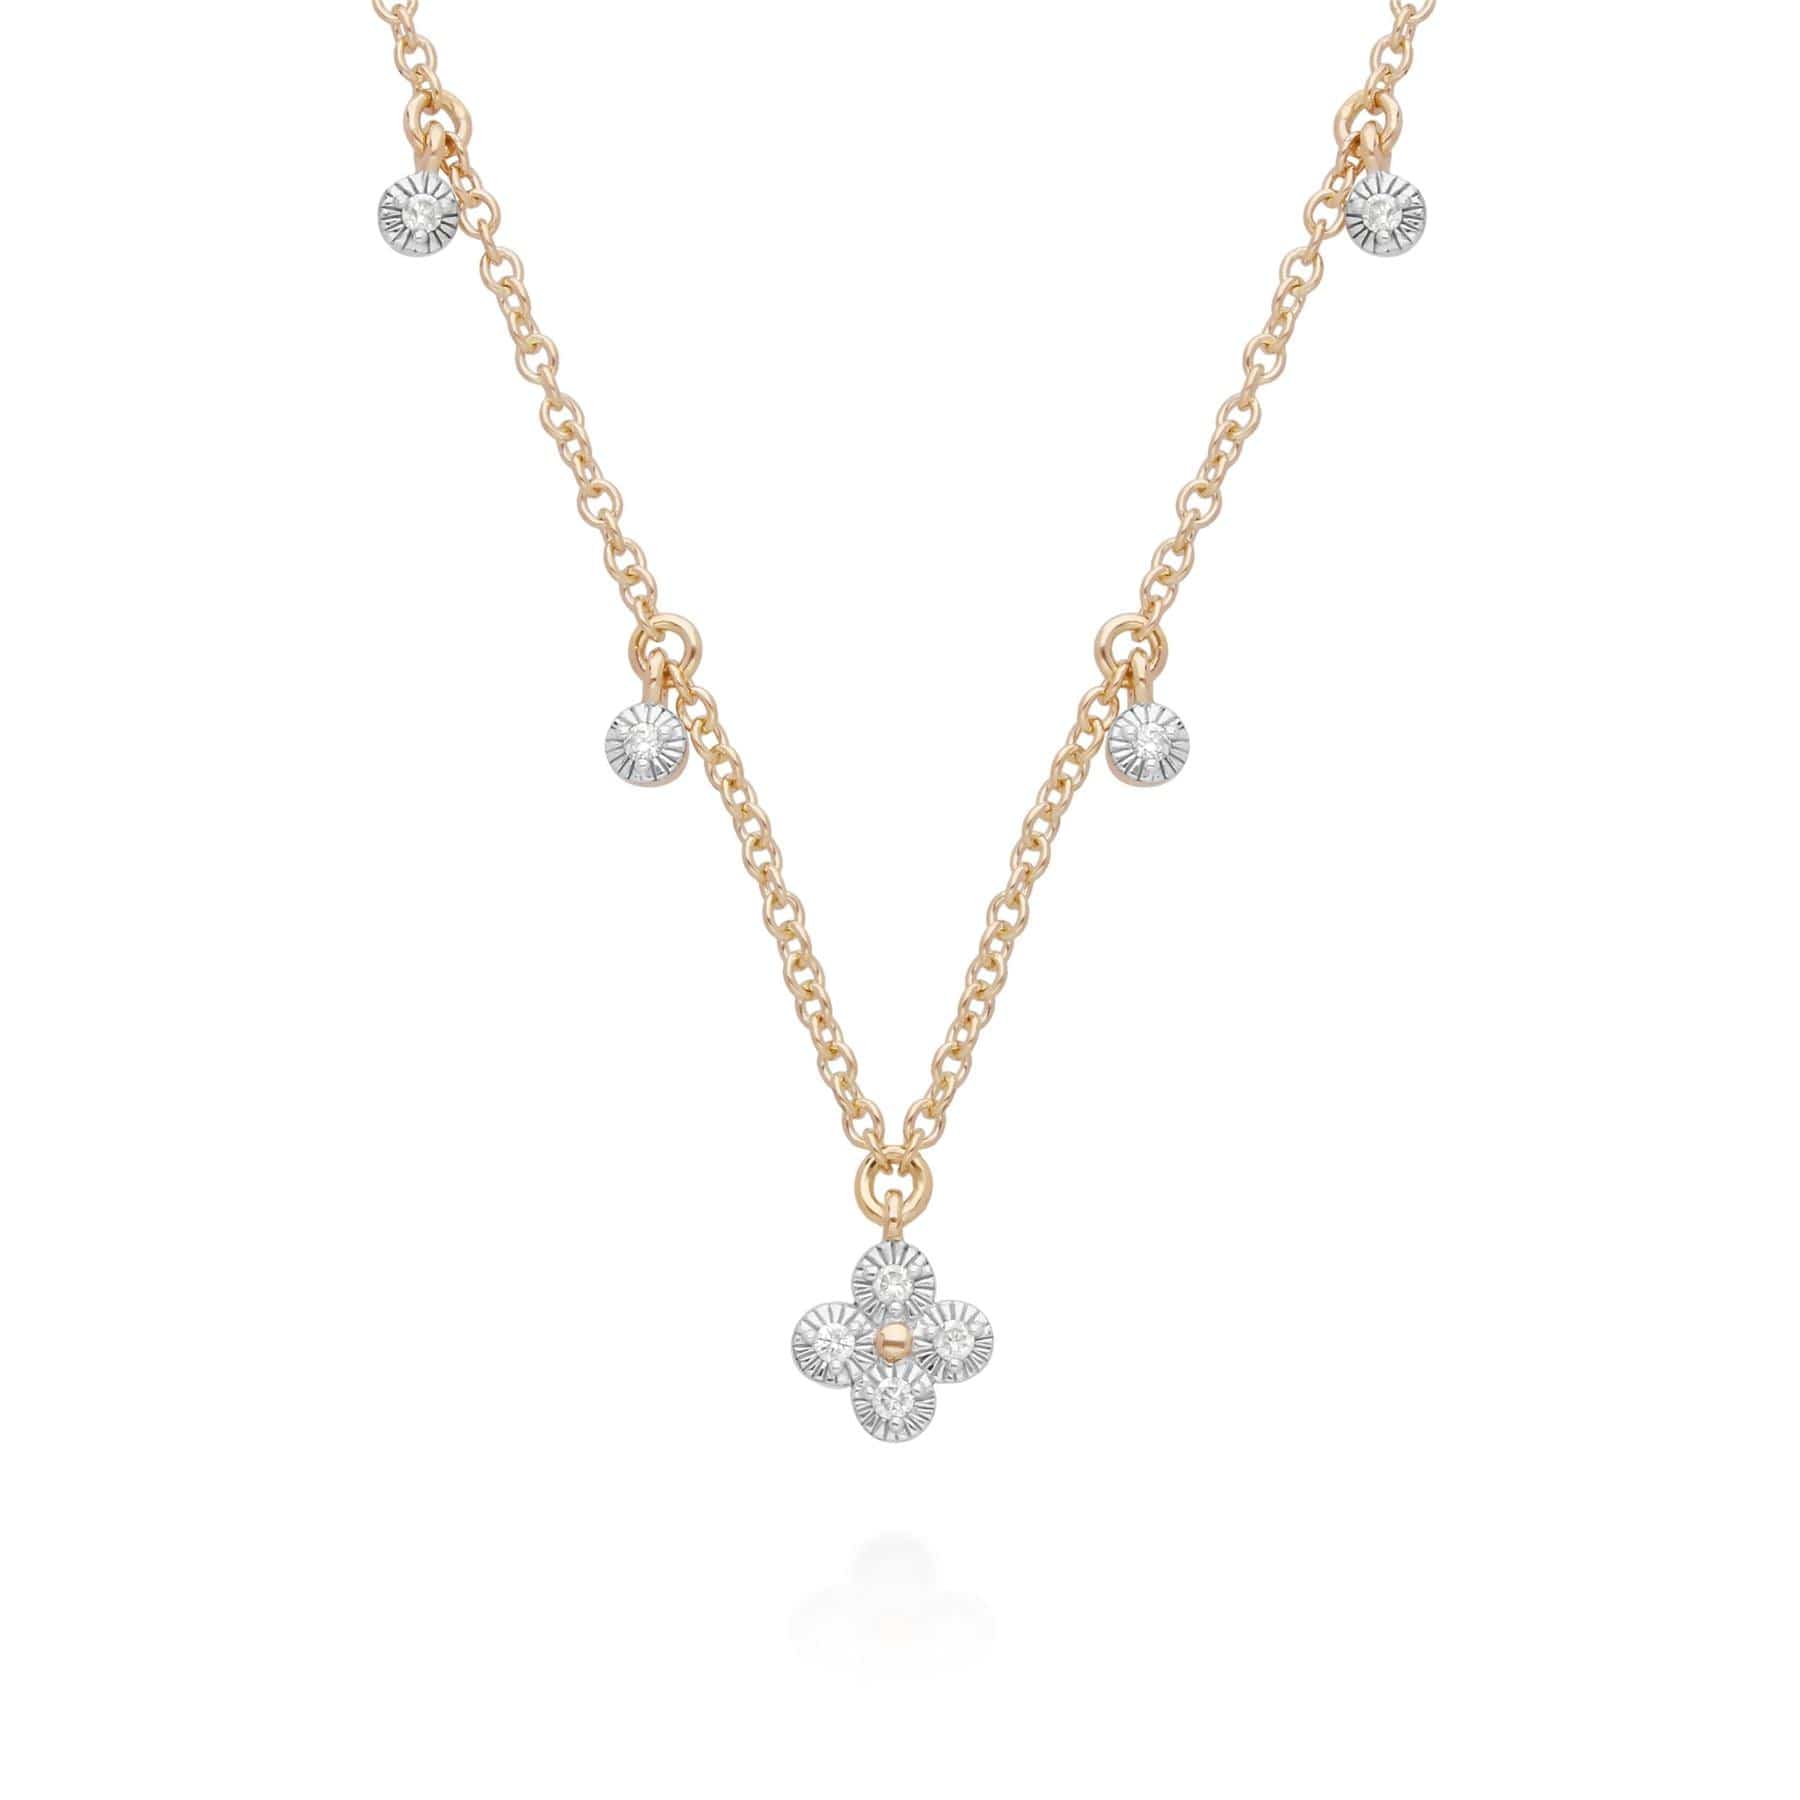 191N0232019 Diamond Flowers Choker Charm Necklace in 9ct Yellow Gold 1